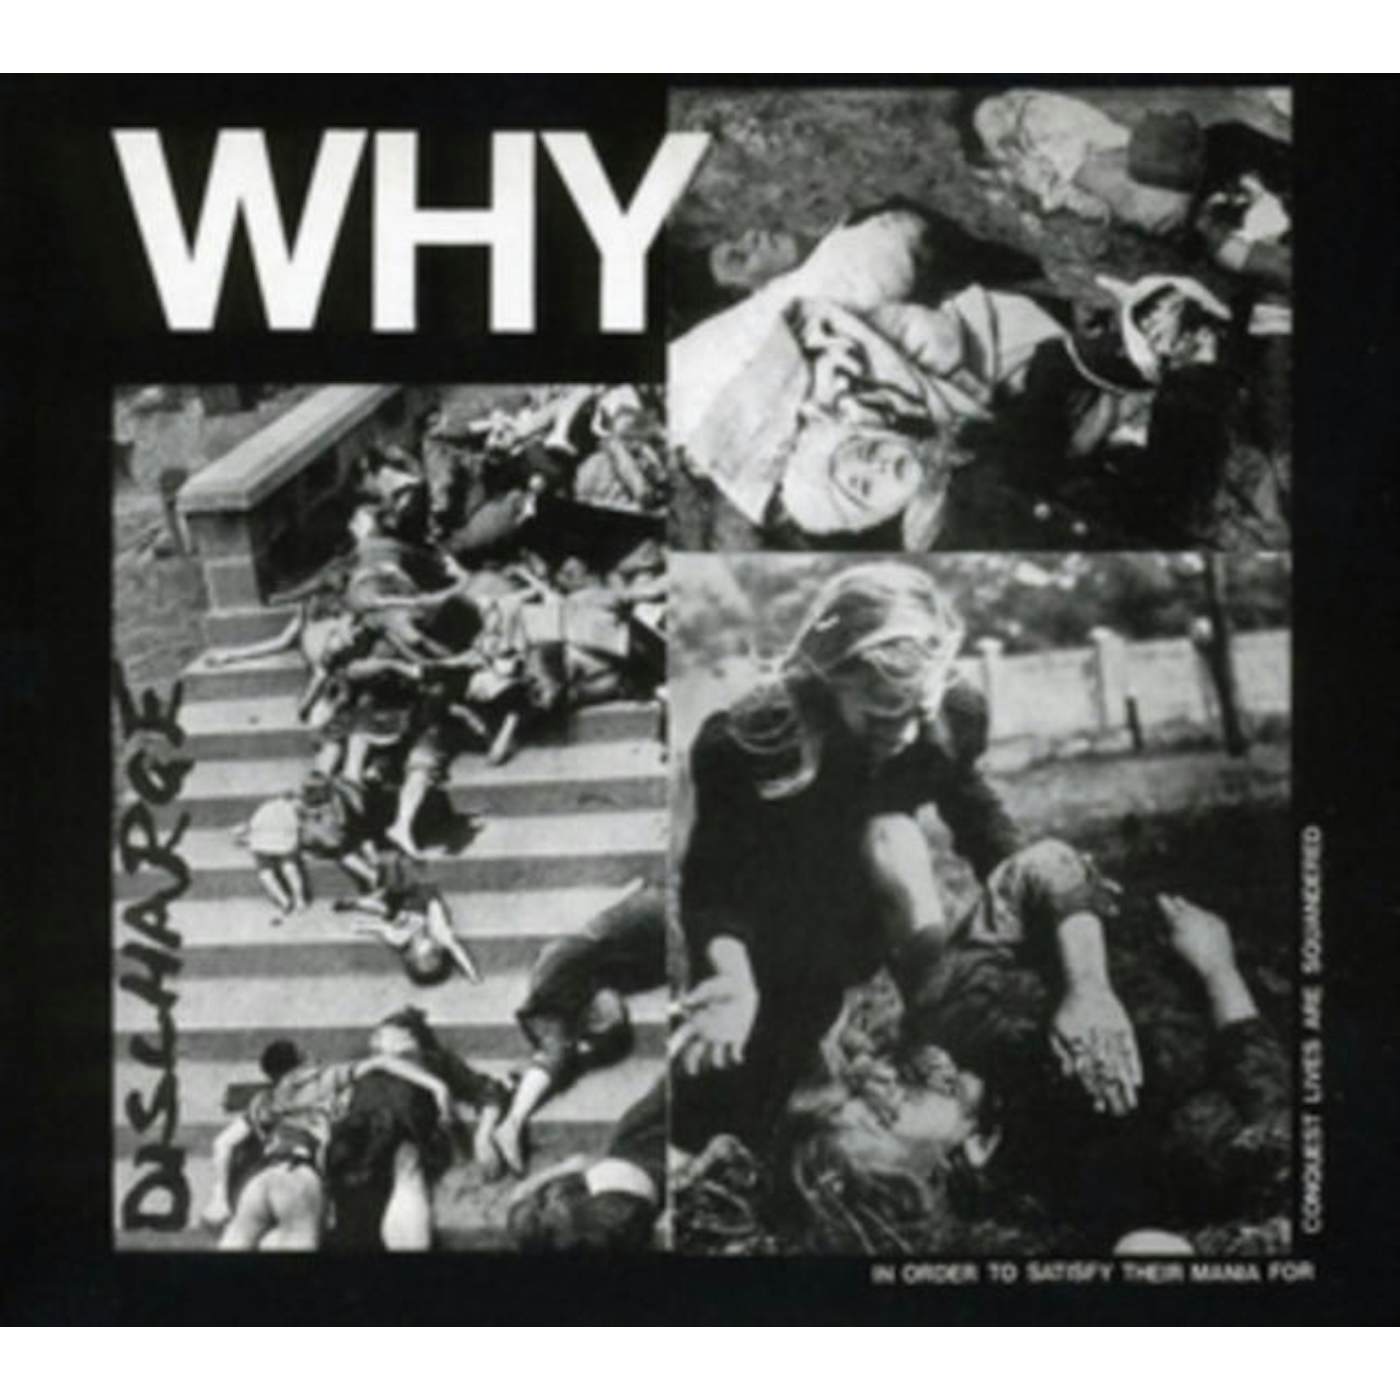 Discharge CD - Why? (Deluxe Digipak)